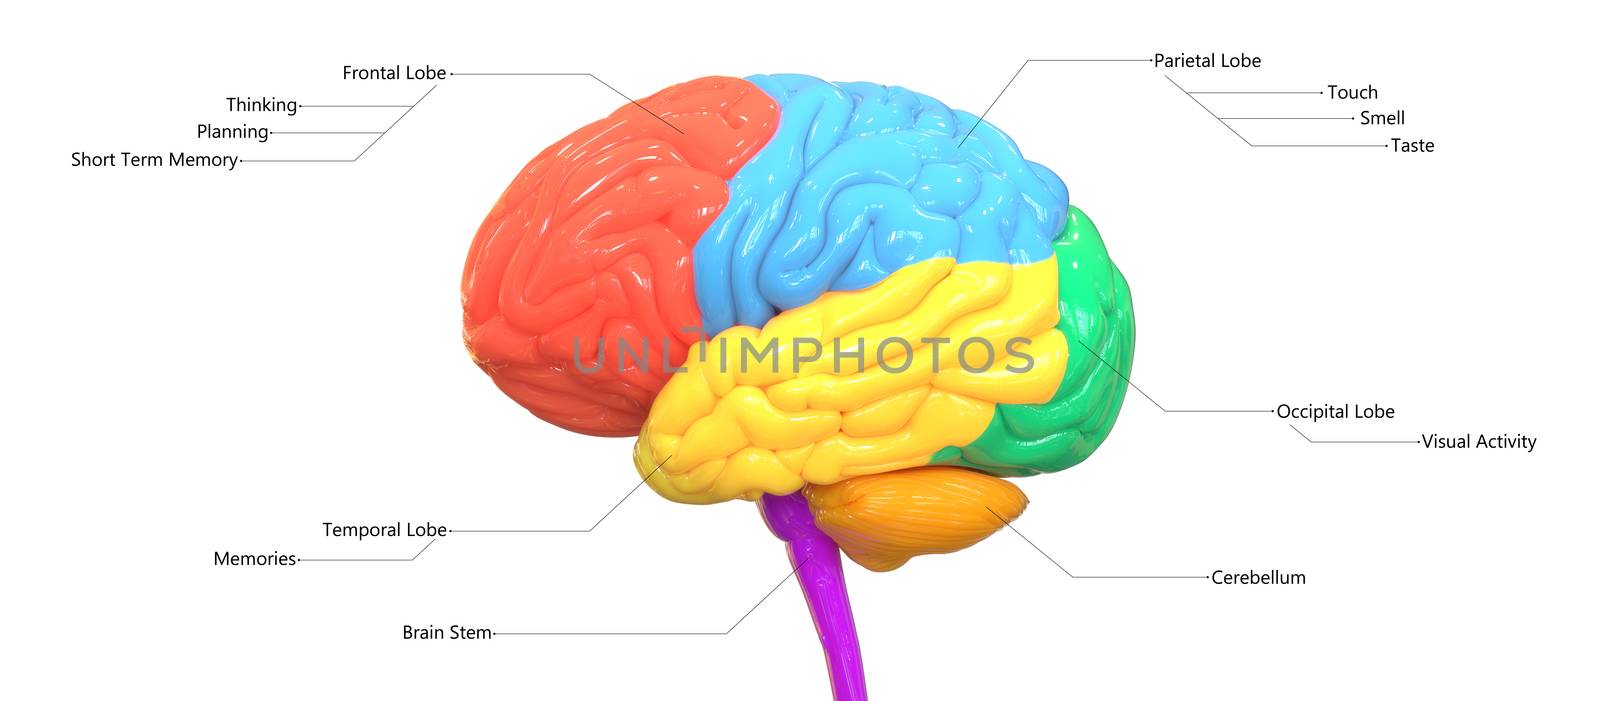 Central Organ of Human Nervous System Brain Lobes Described with Labels Anatomy Lateral View by magicmine